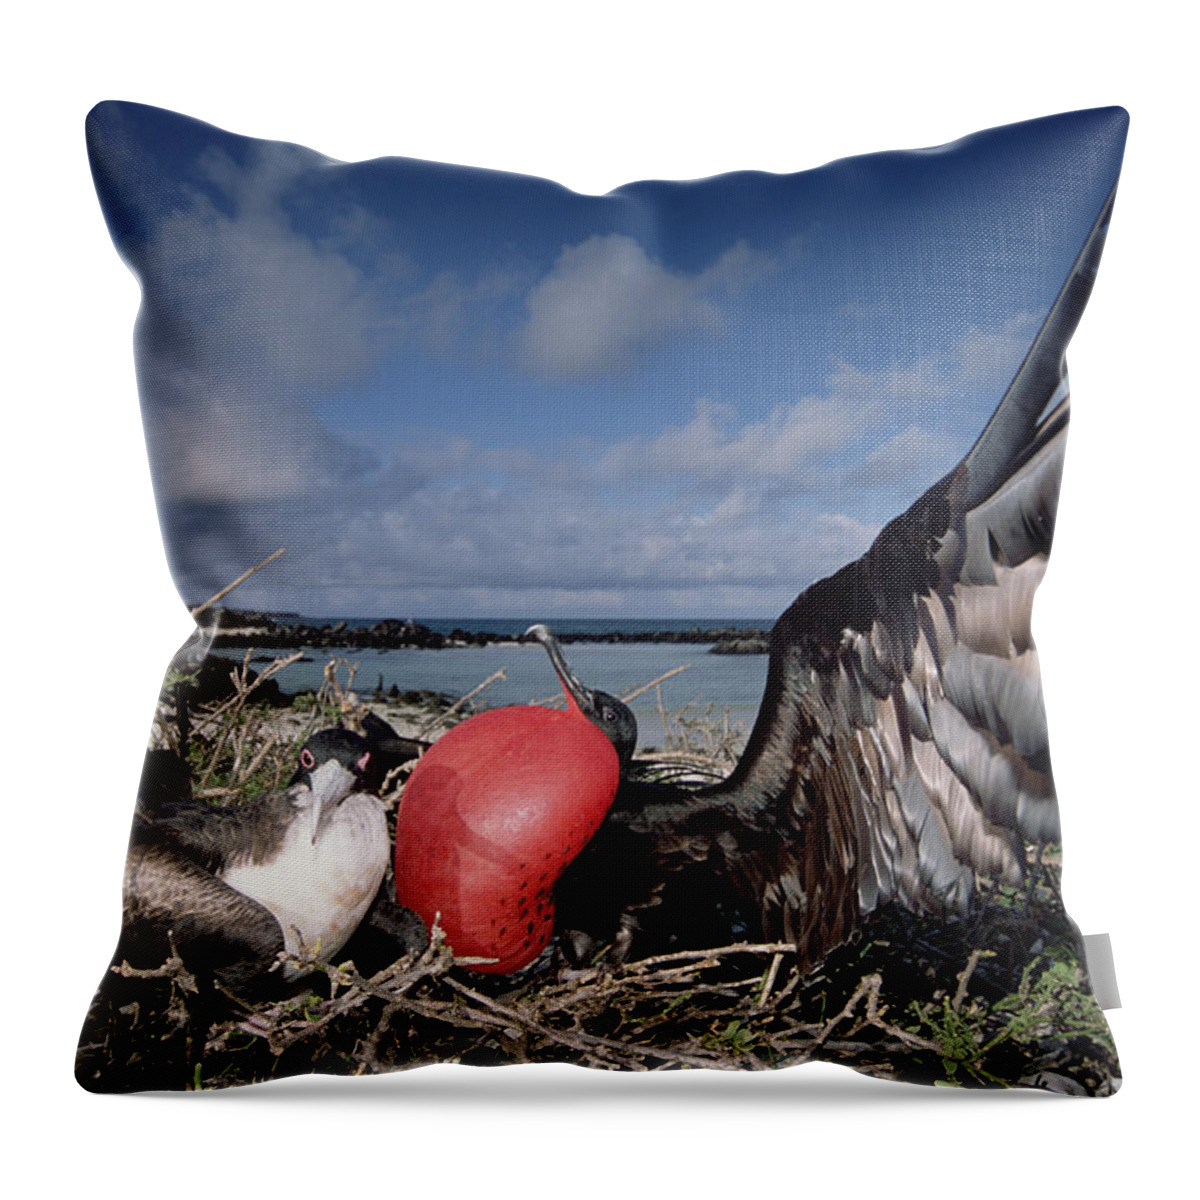 00141693 Throw Pillow featuring the photograph Great Frigatebirds Courting by Tui De Roy